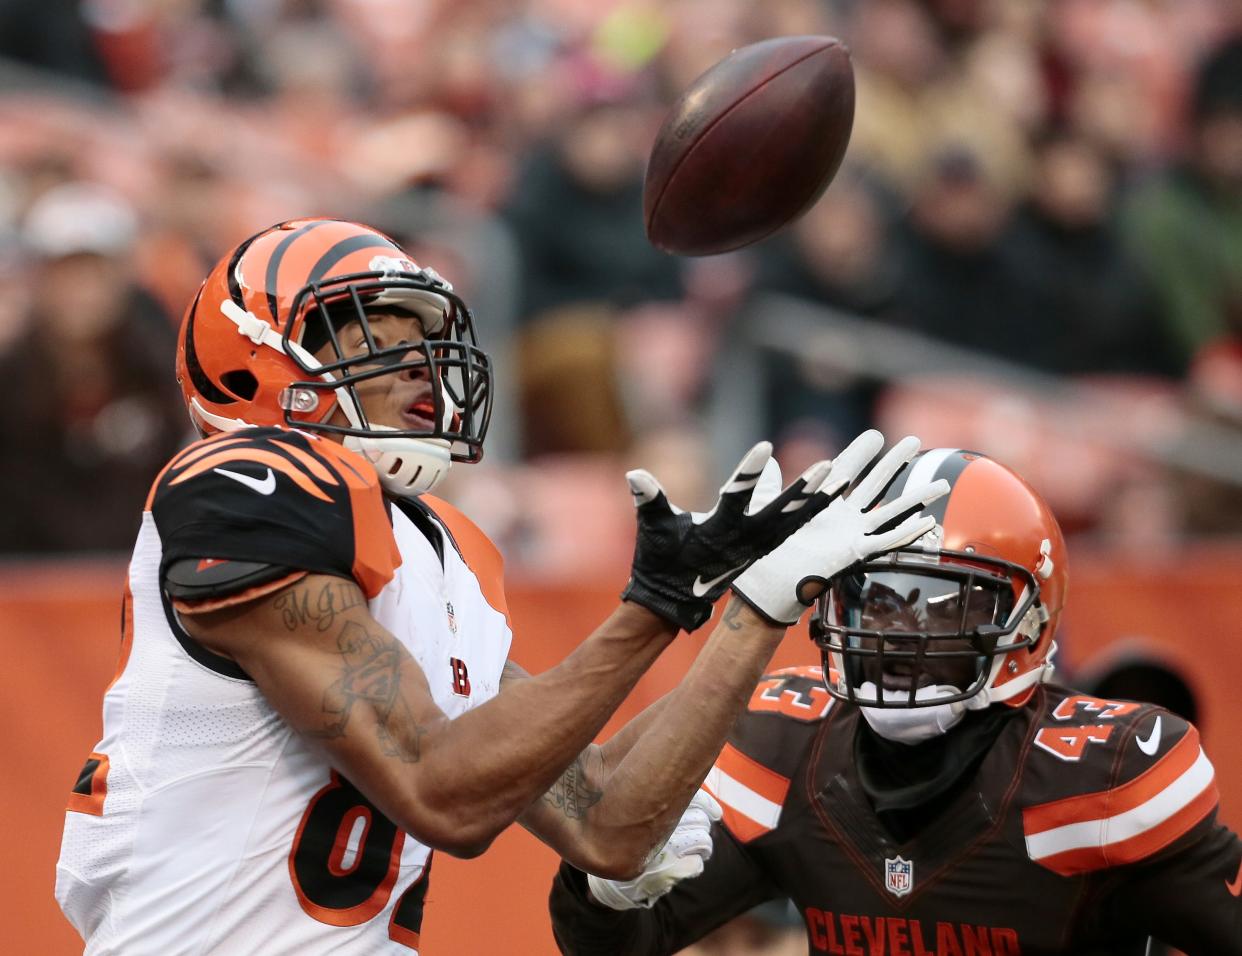 Bengals wide receiver Marvin Jones caught a career-high 10 touchdowns in 2013.